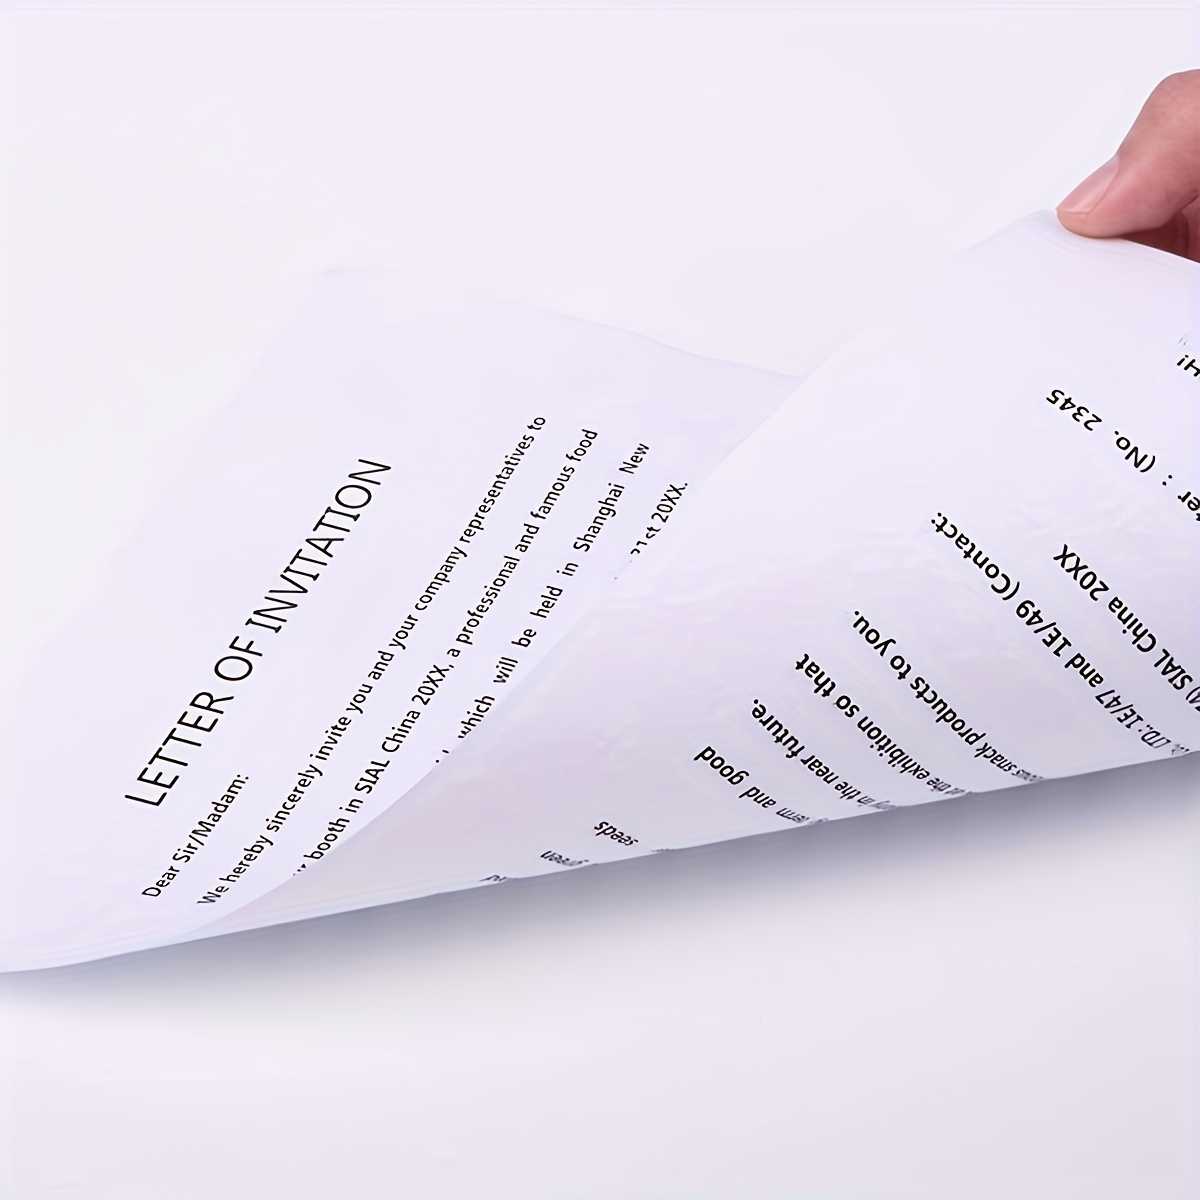 A4 Multifunction Copy Paper A4 Printing Paper White Office Paper Antistatic